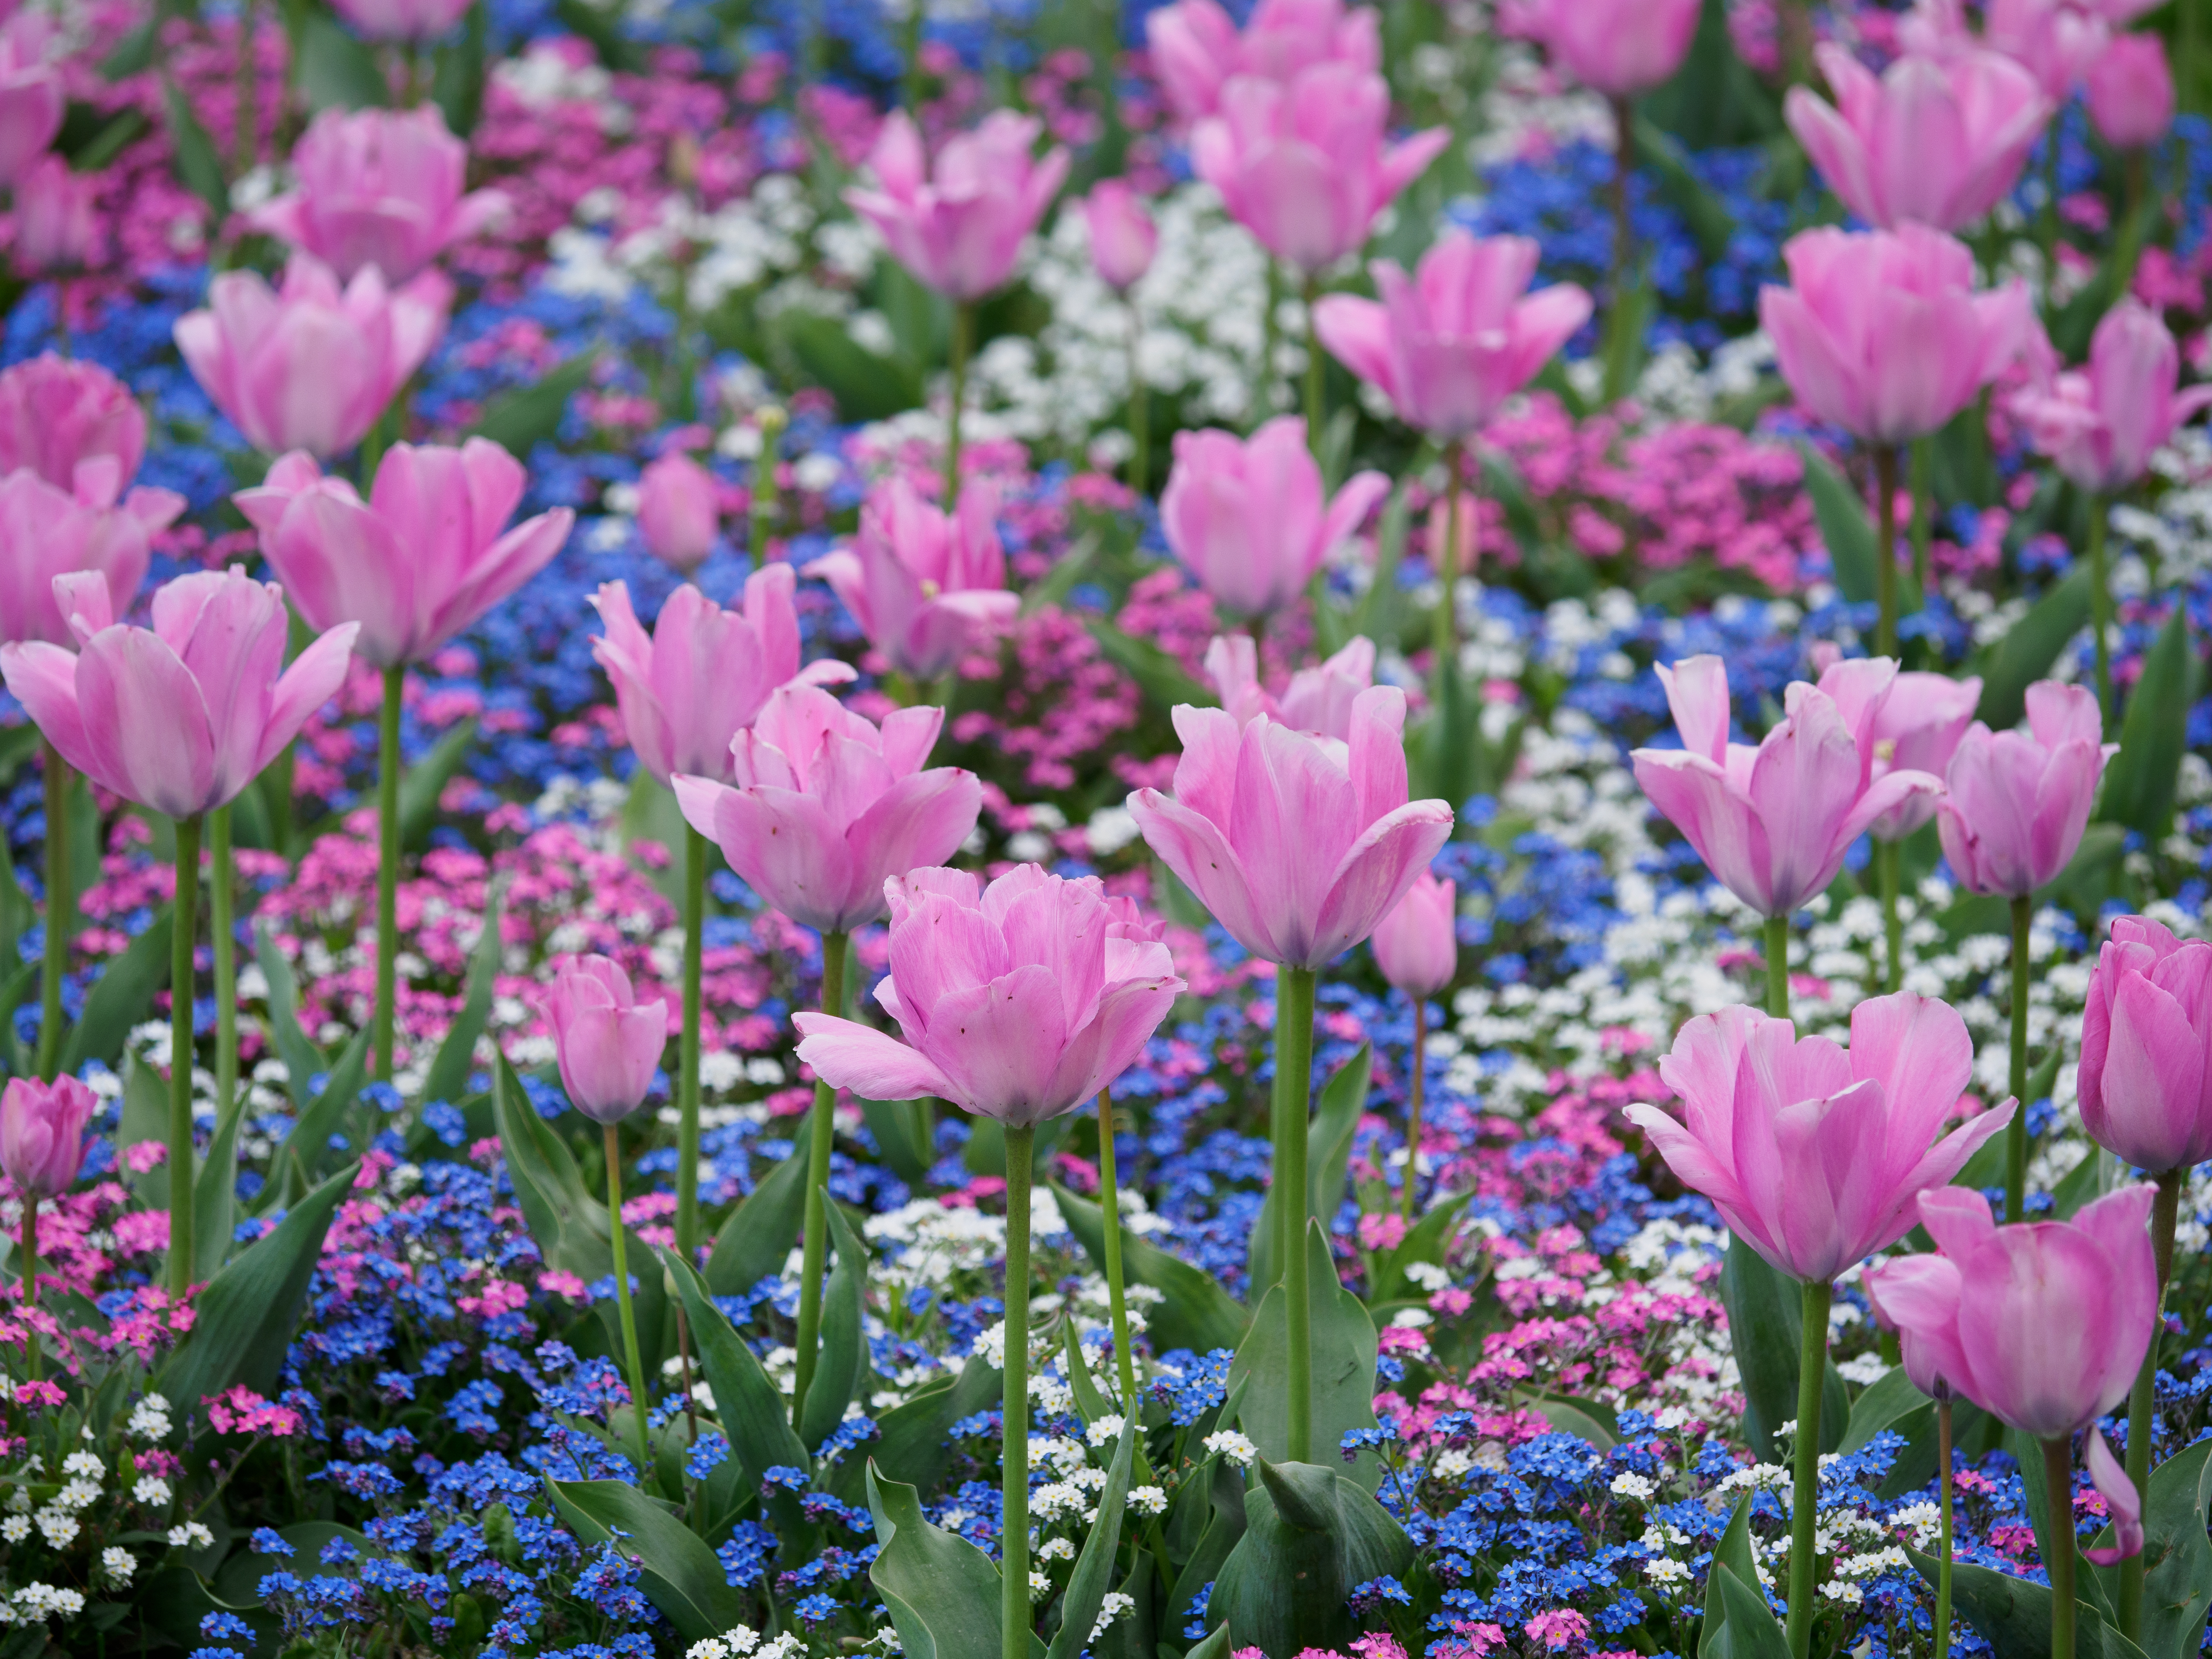 Olympus OM System M.Zuiko Digital ED 40-150mm f/4 PRO sample image, Pink tulips among small blue pink and white flowers